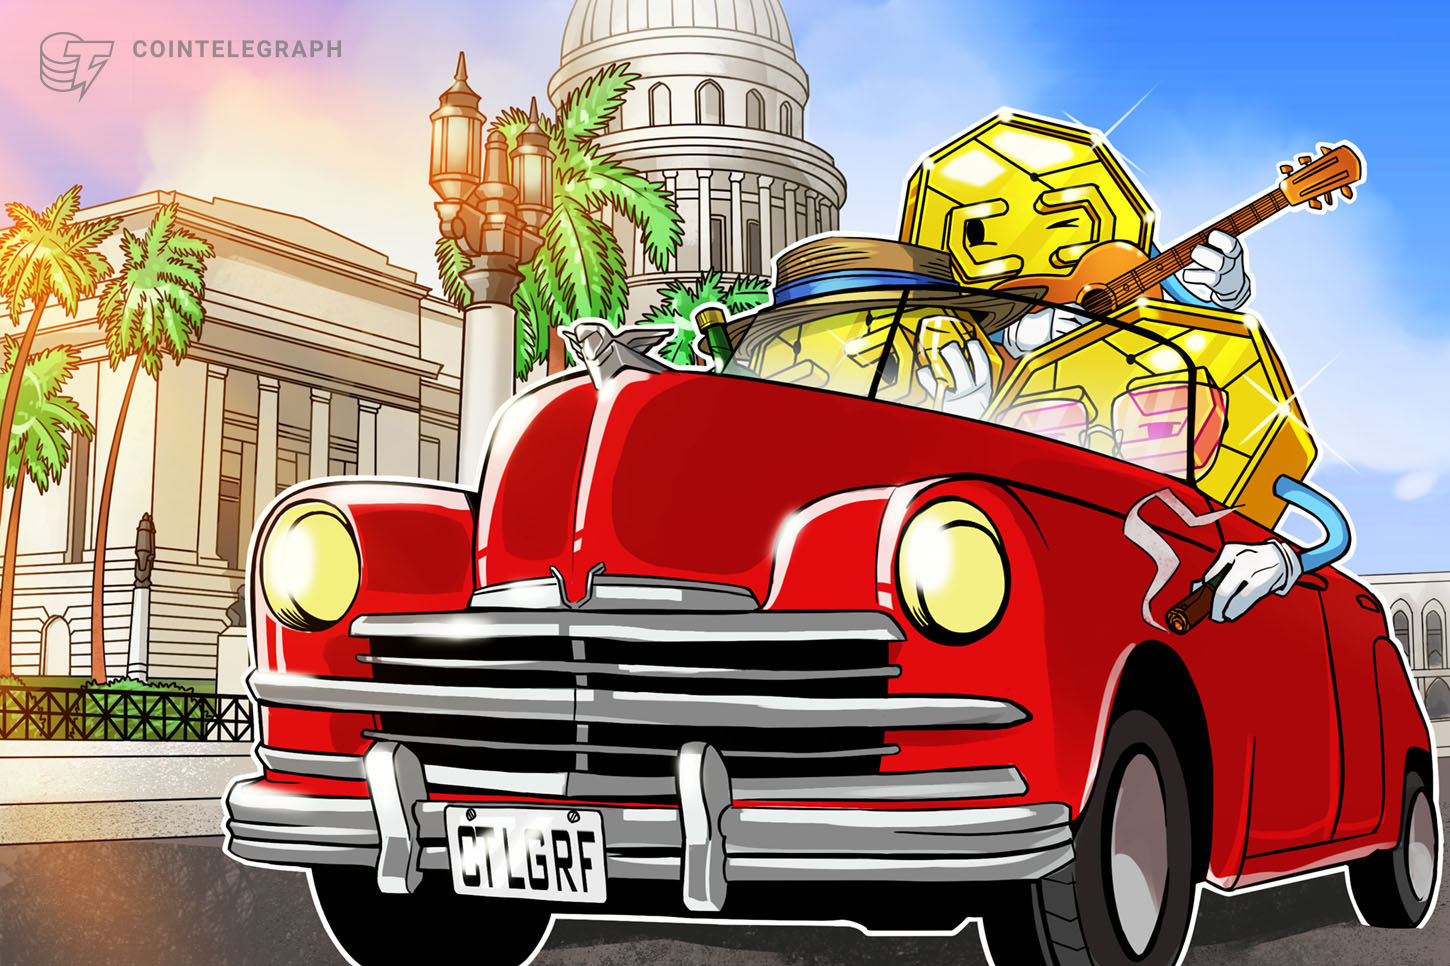 Cuba’s exploding crypto curiosity comes amid an absence of regulation